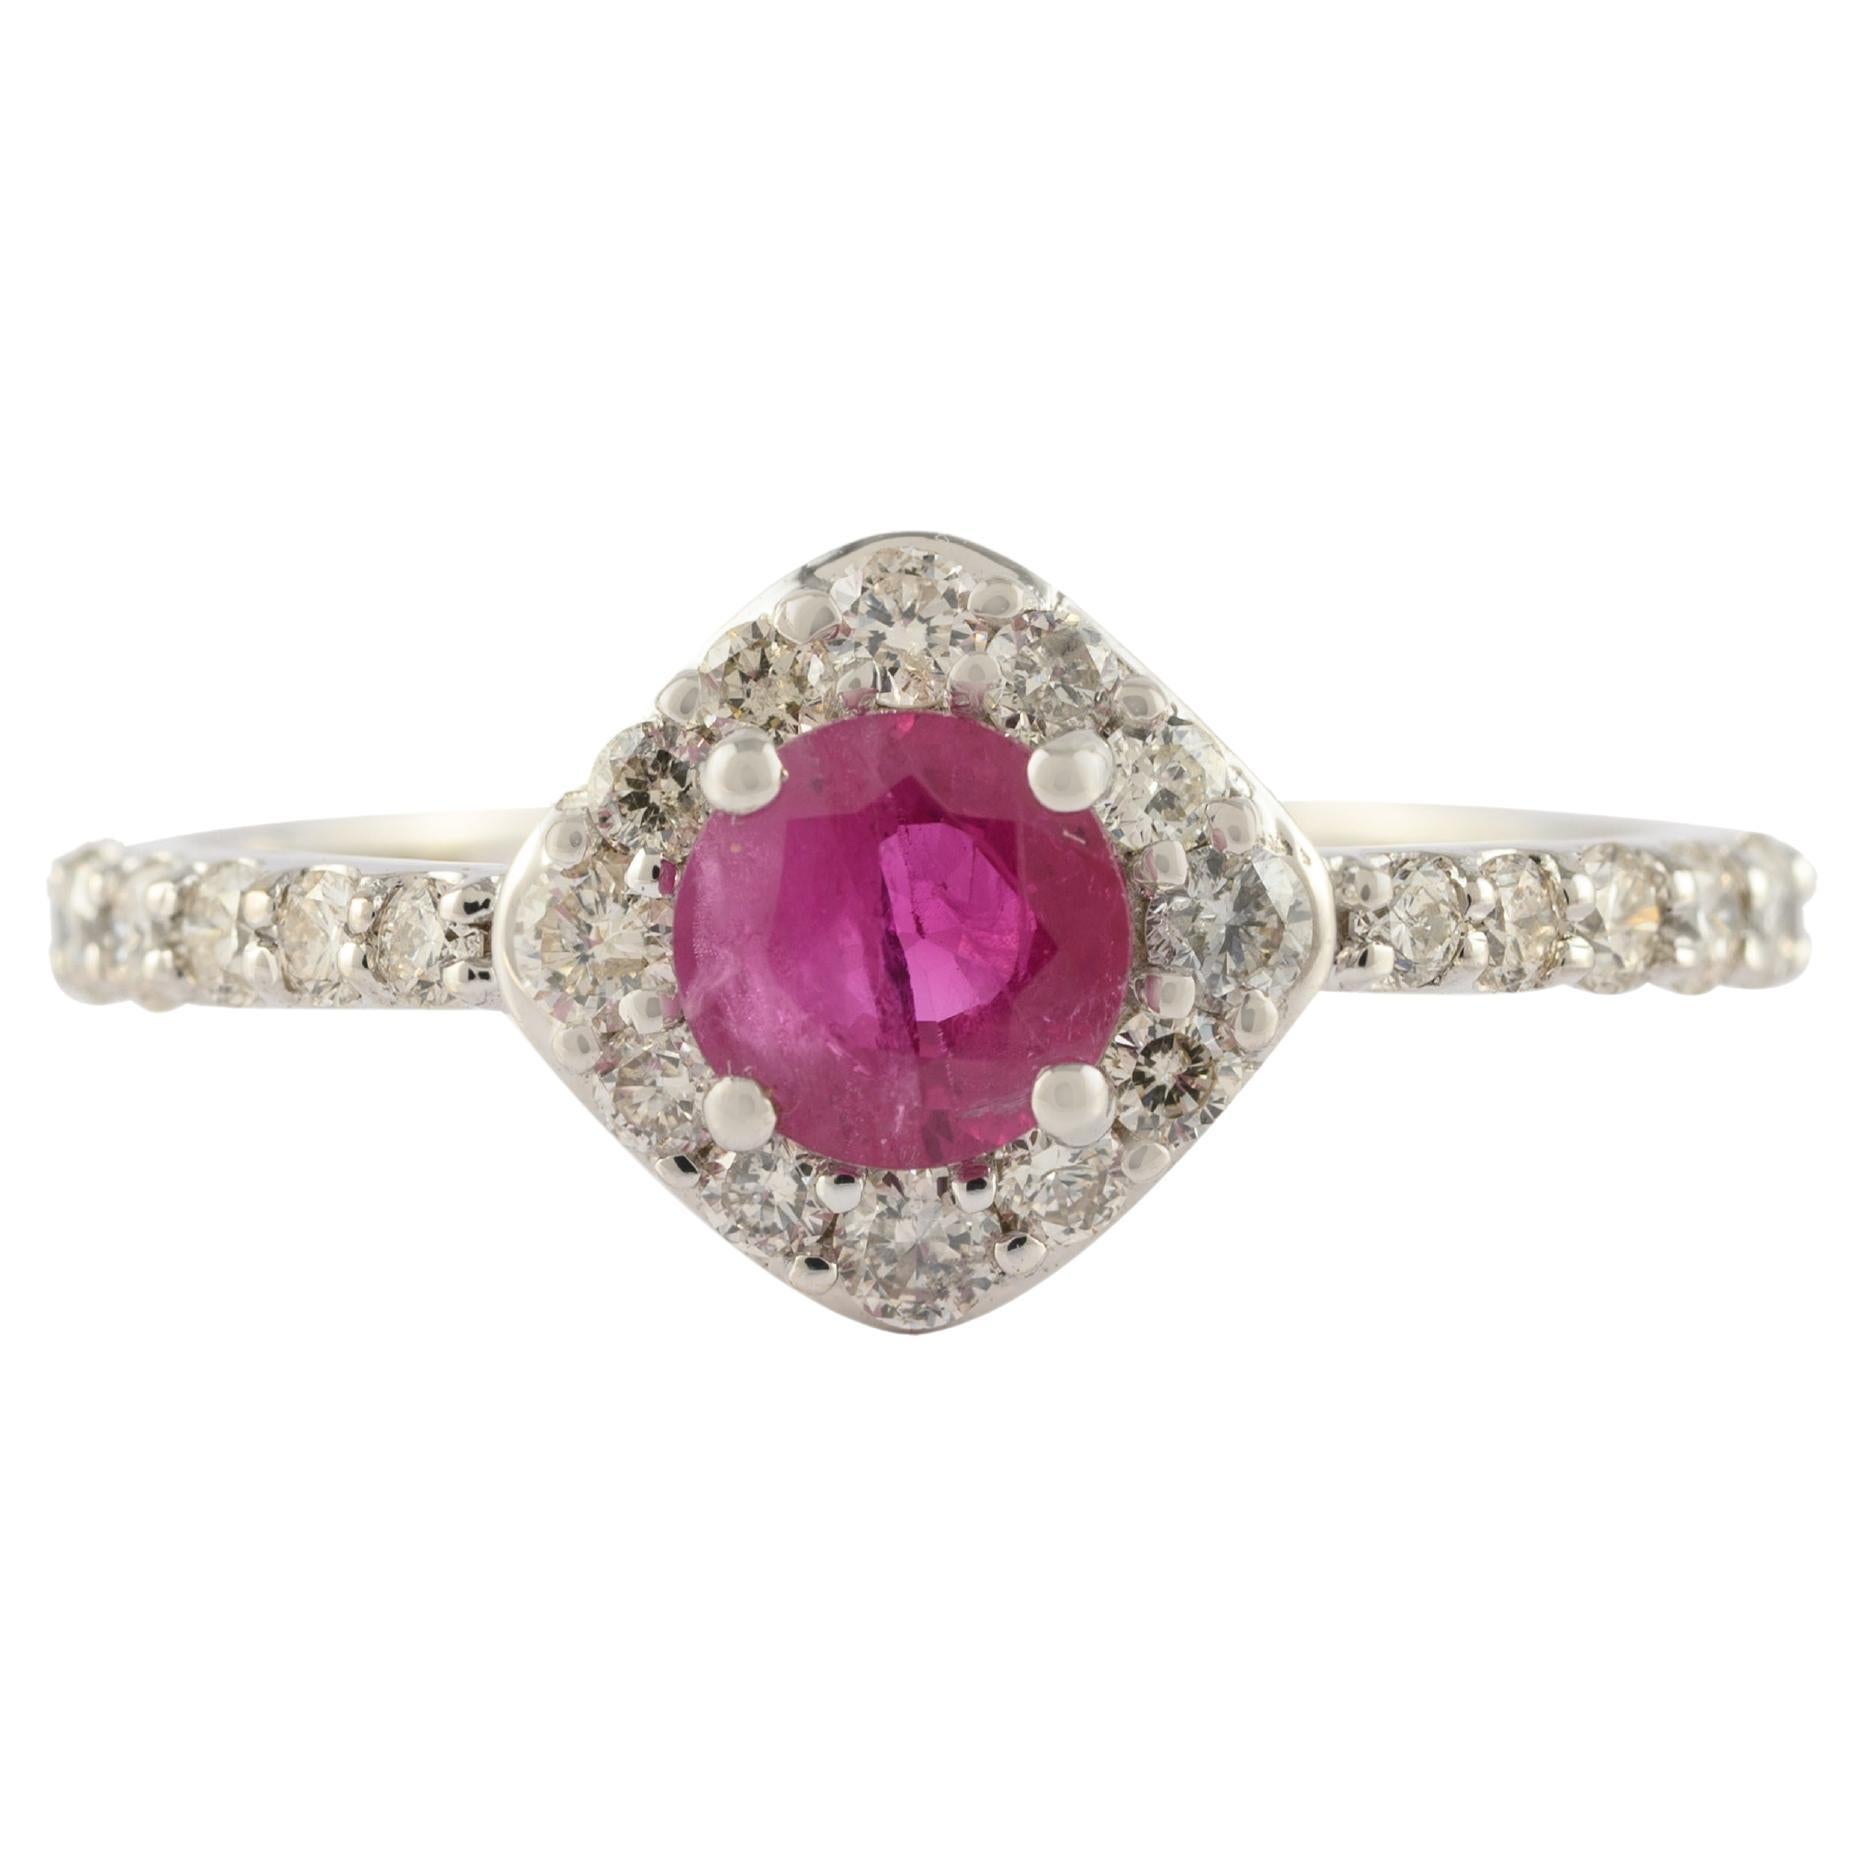 For Sale:  Elegant Round Cut Ruby Ring and Halo Diamond Studded in 14k Solid White Gold